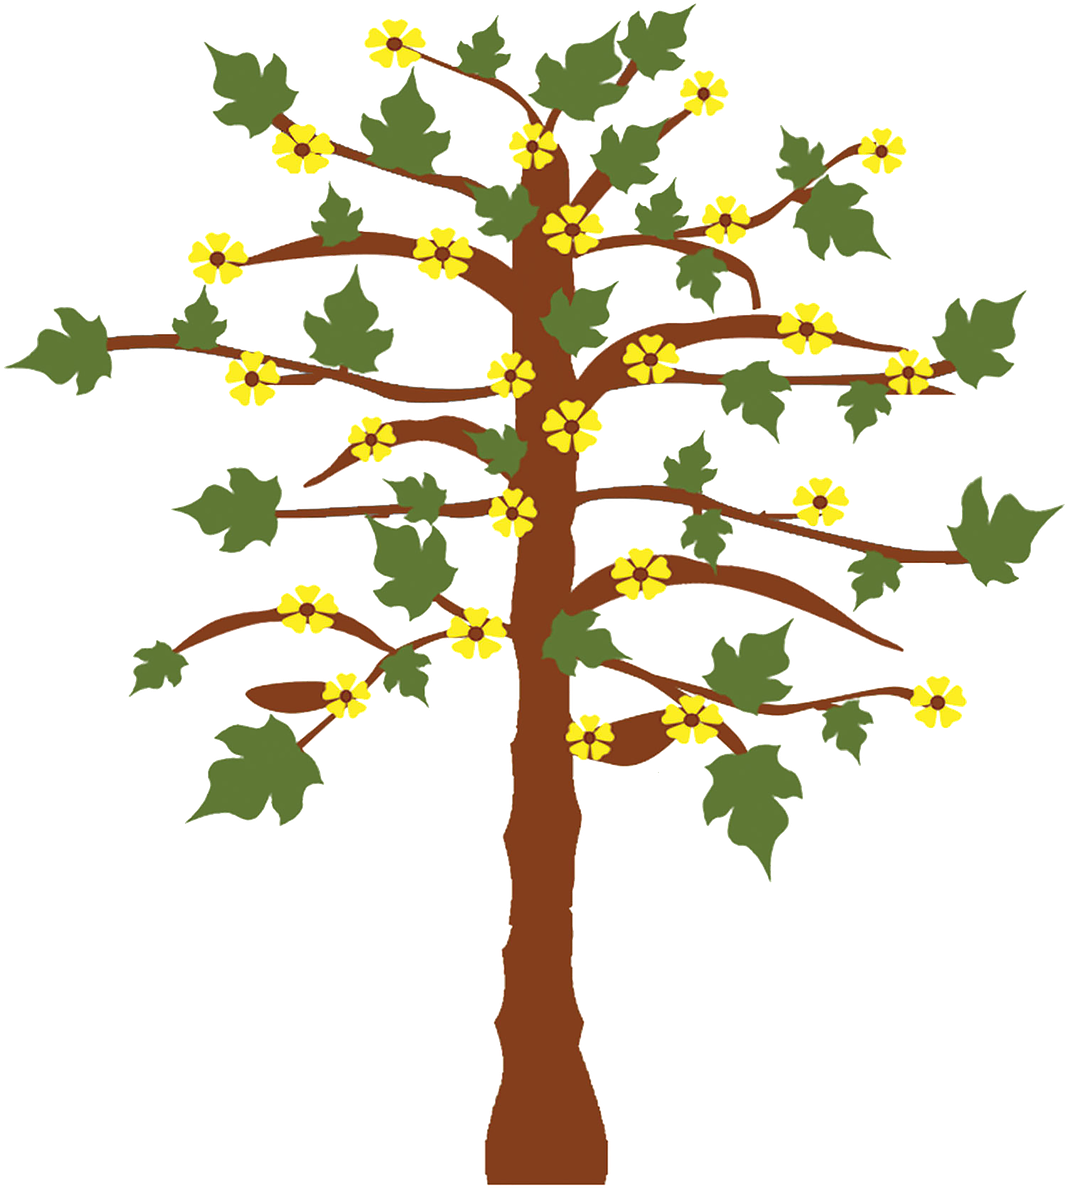 A Tree With Yellow Flowers And Leaves